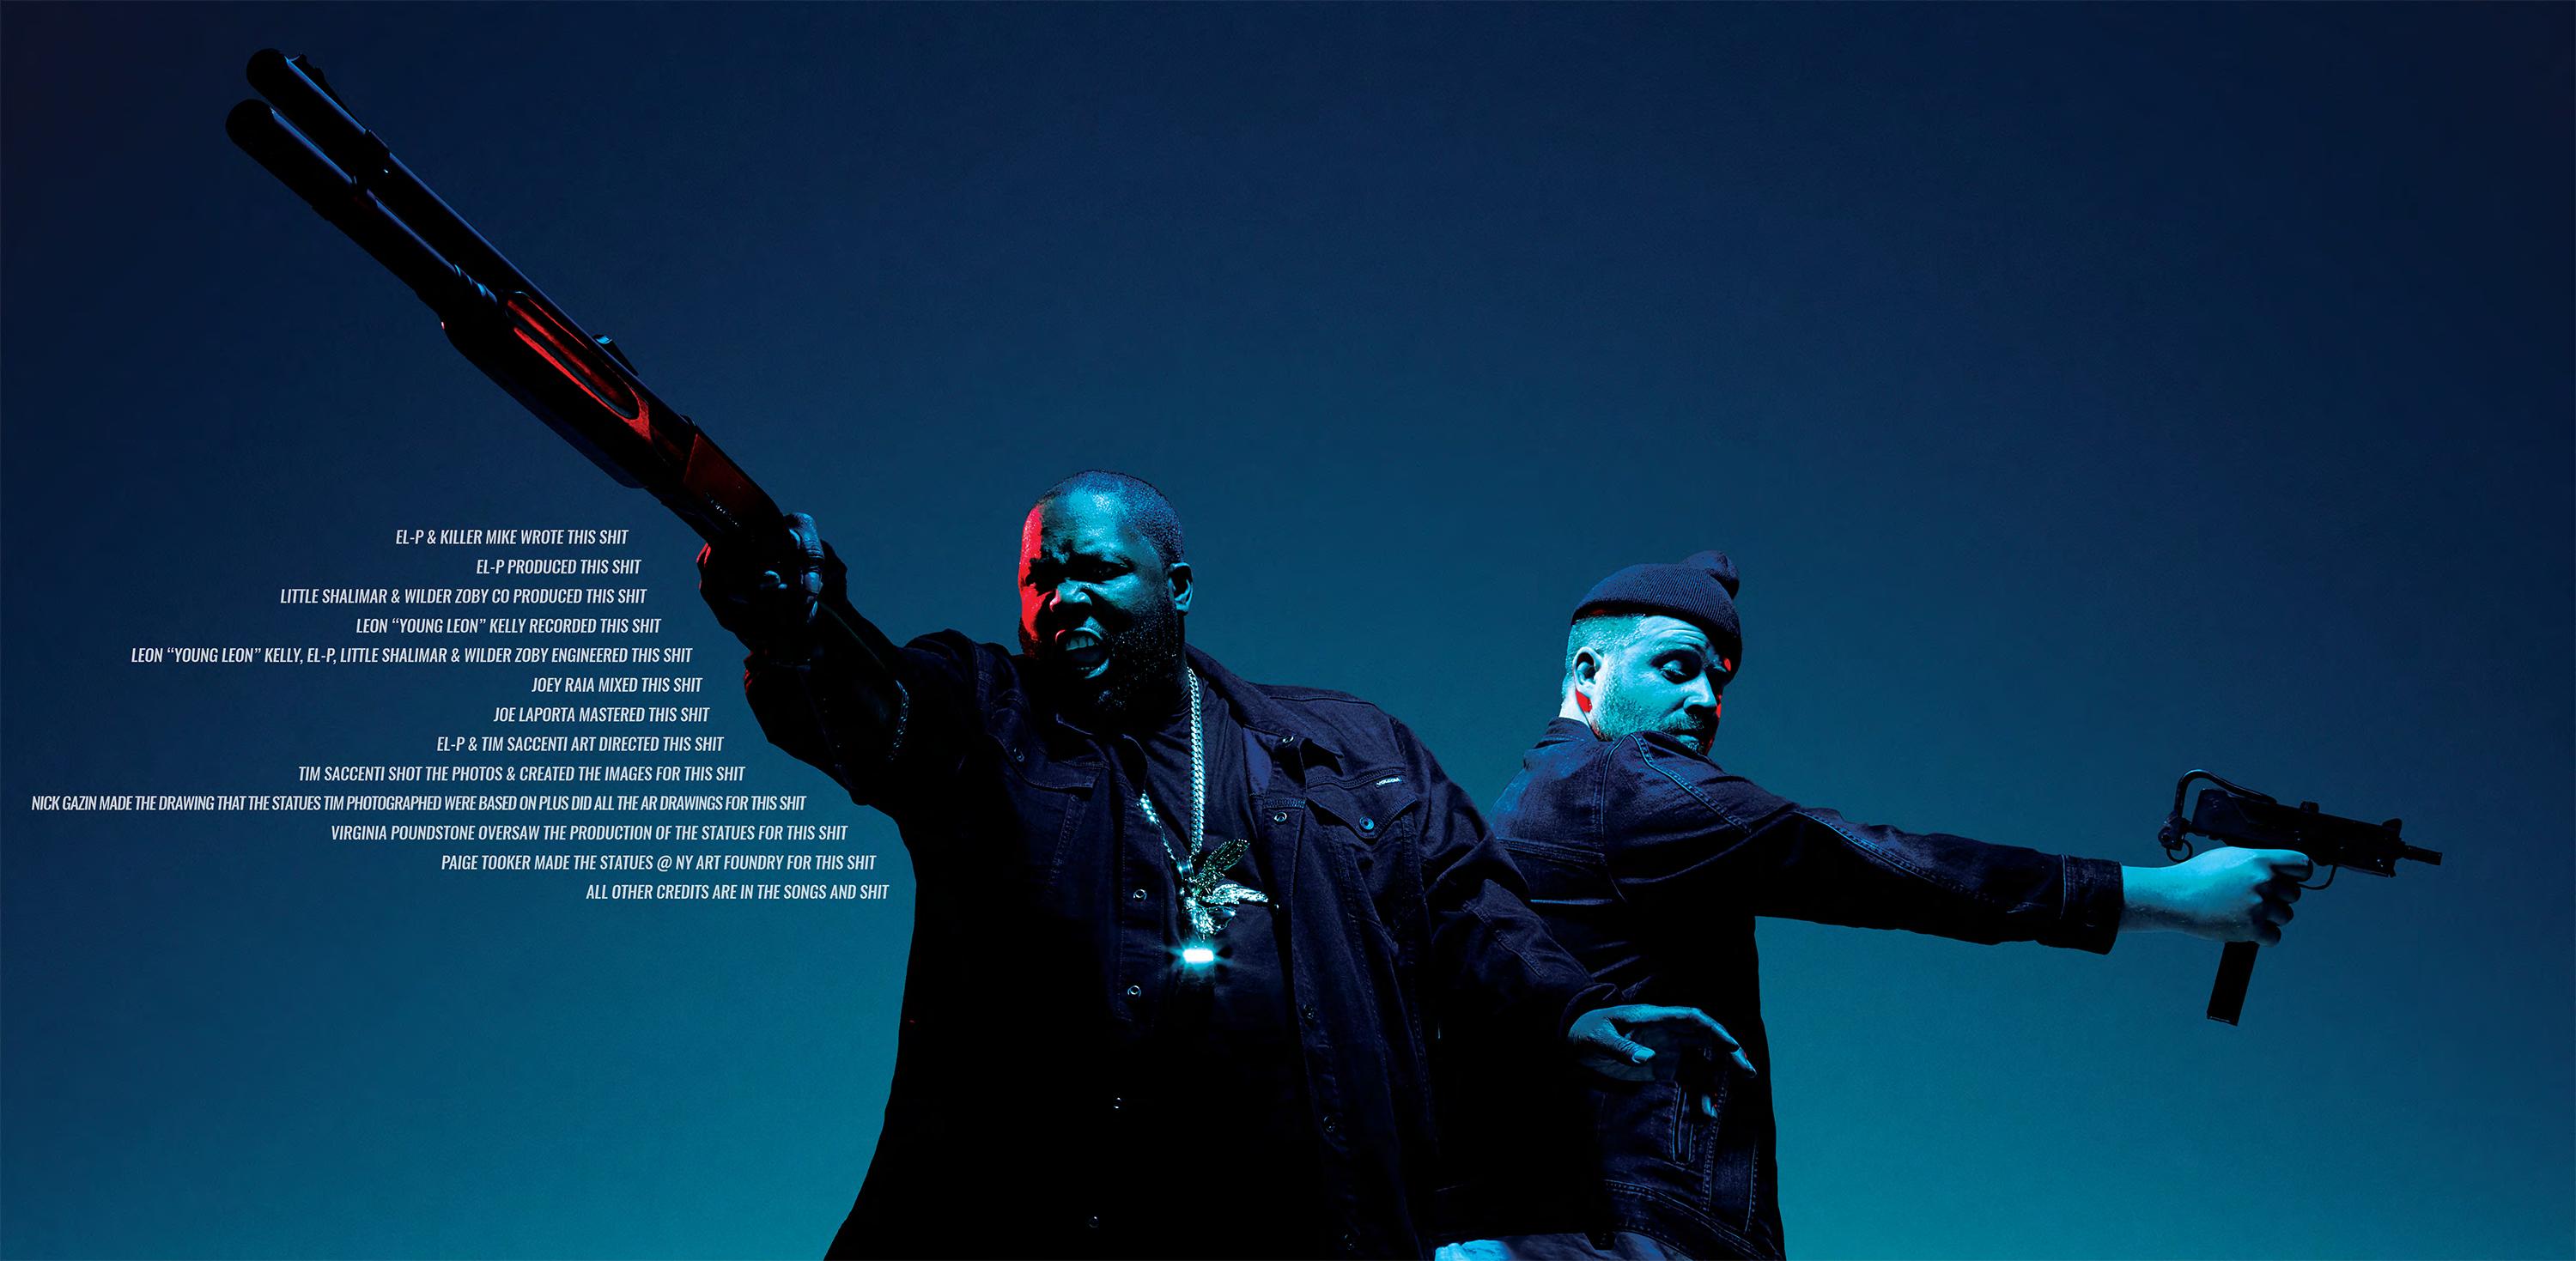 This picture from the RTJ3 booklet makes for a great wallpaper